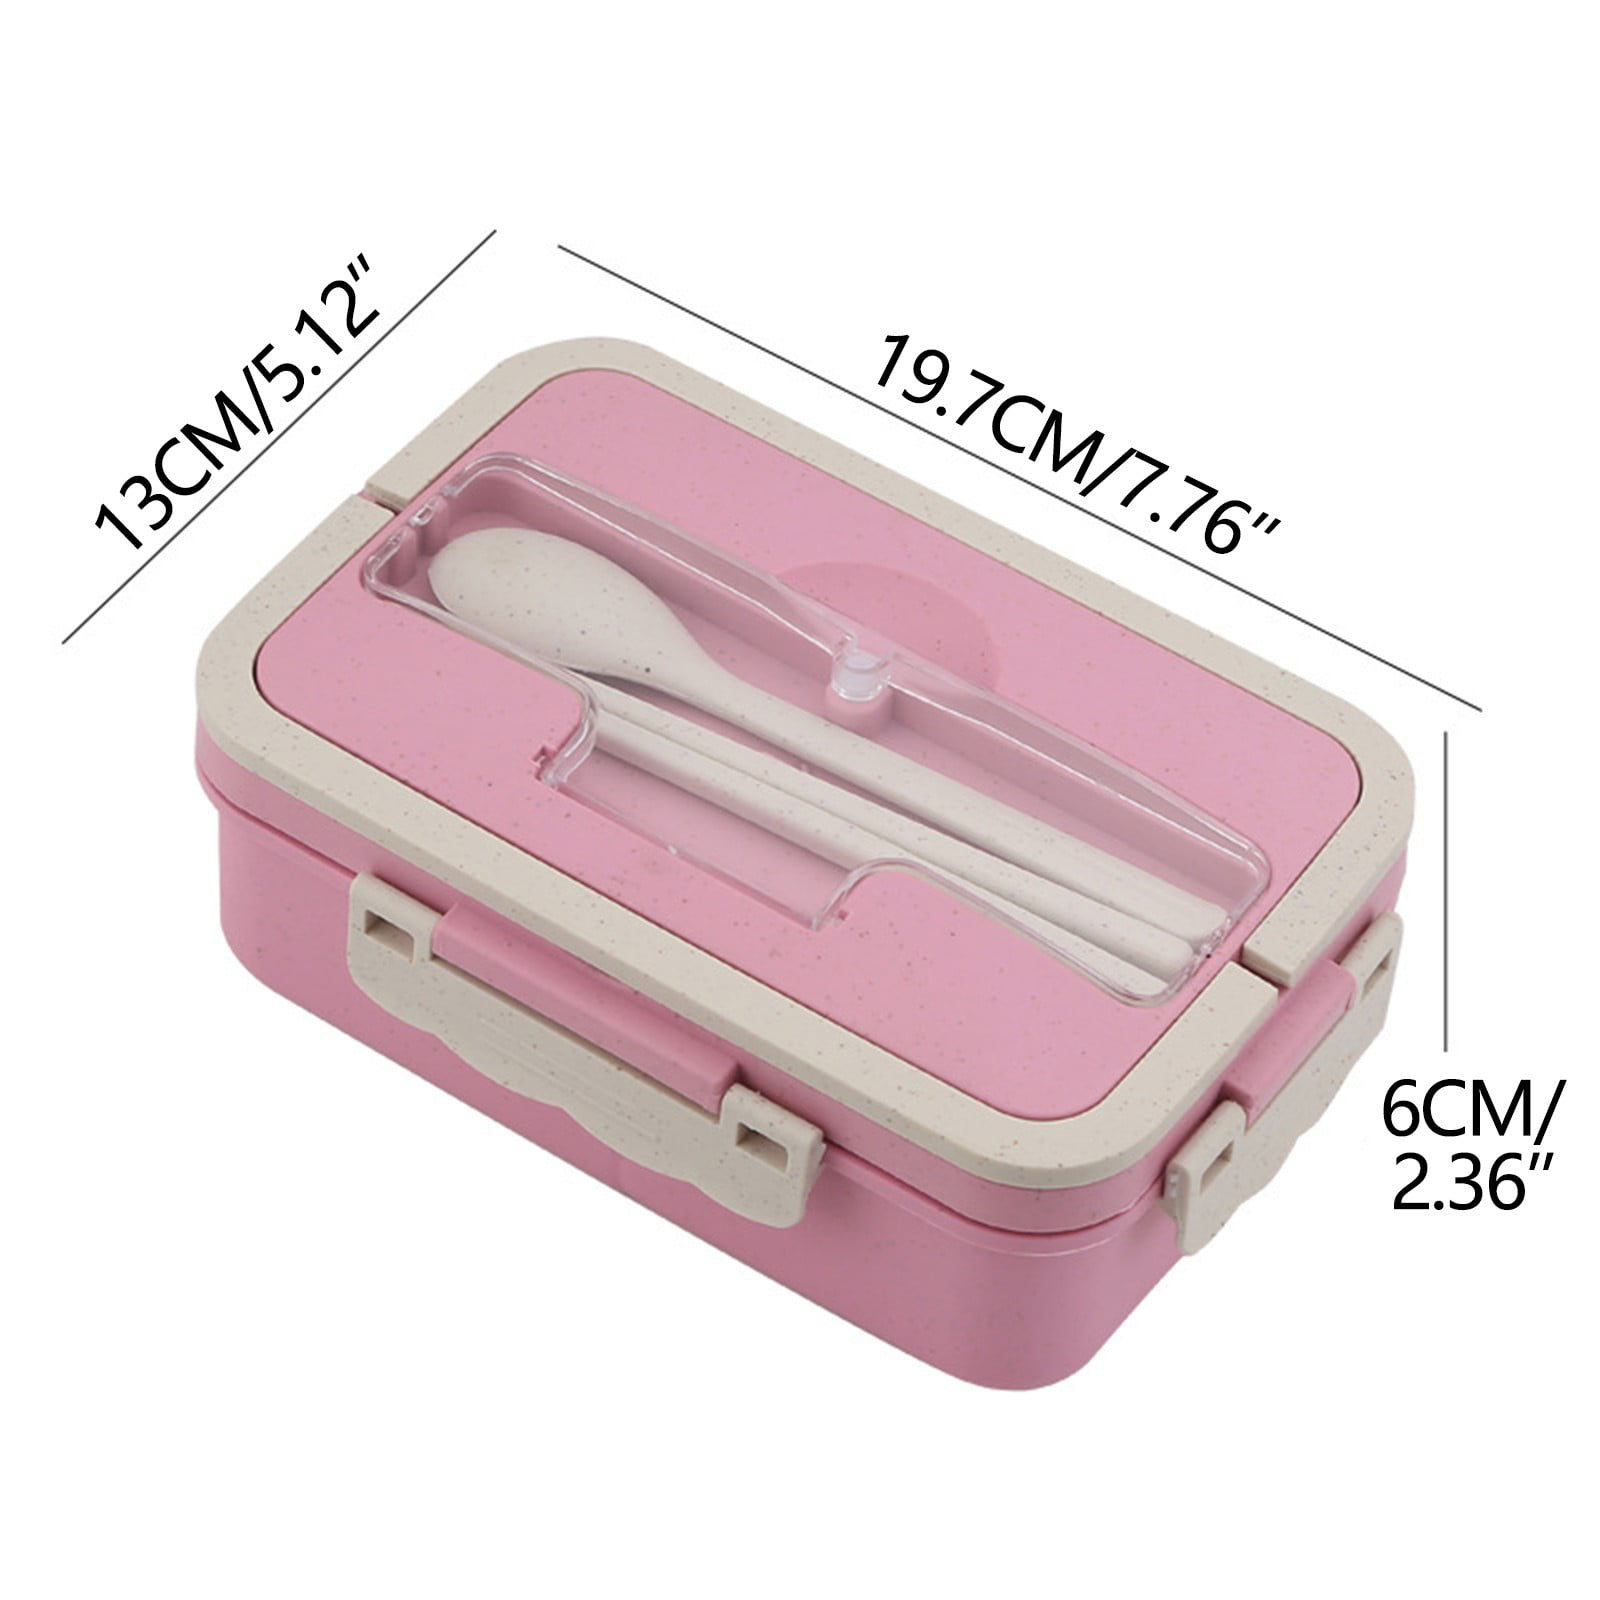 Tohuu Double Layer Lunch Container Double Layer Cute Lunch Box With Cutlery  Kids Microwave Safe Lunch Box Portable Stackable Food Container Lunch Boxes  With Stickers For Daycare kindly 